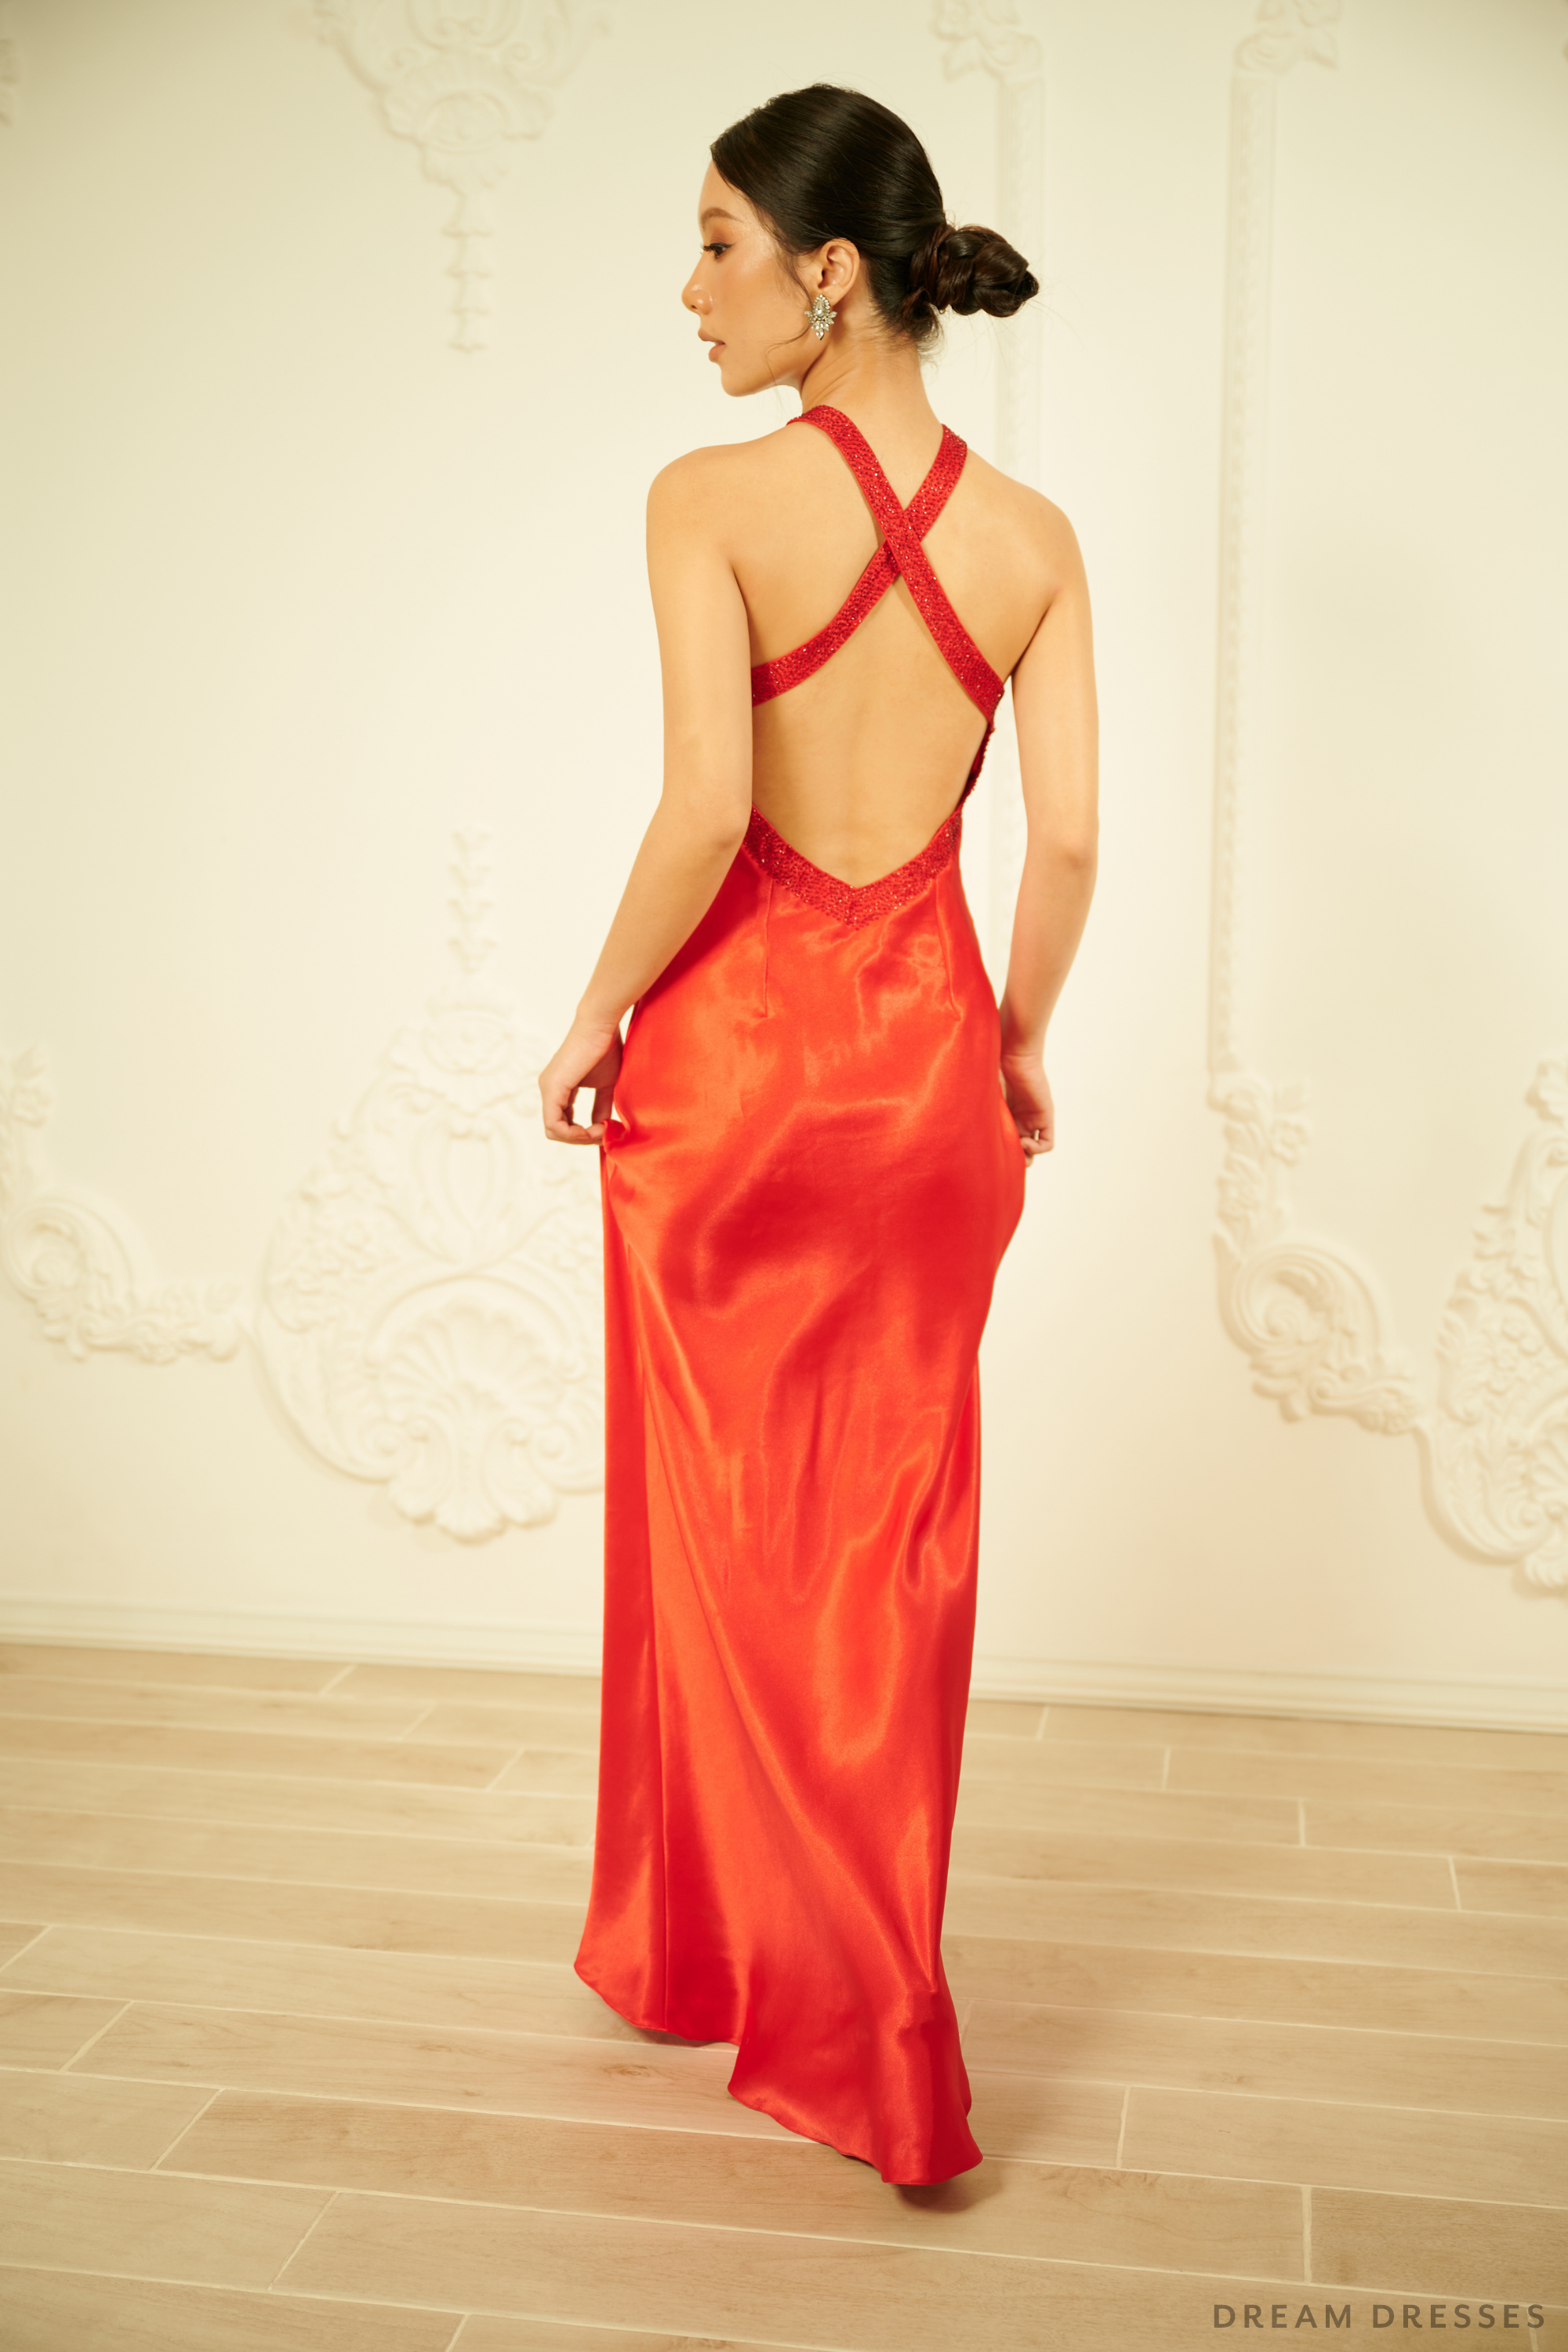 Red Silk Evening Dress with Halter Neck (#LUCIA)